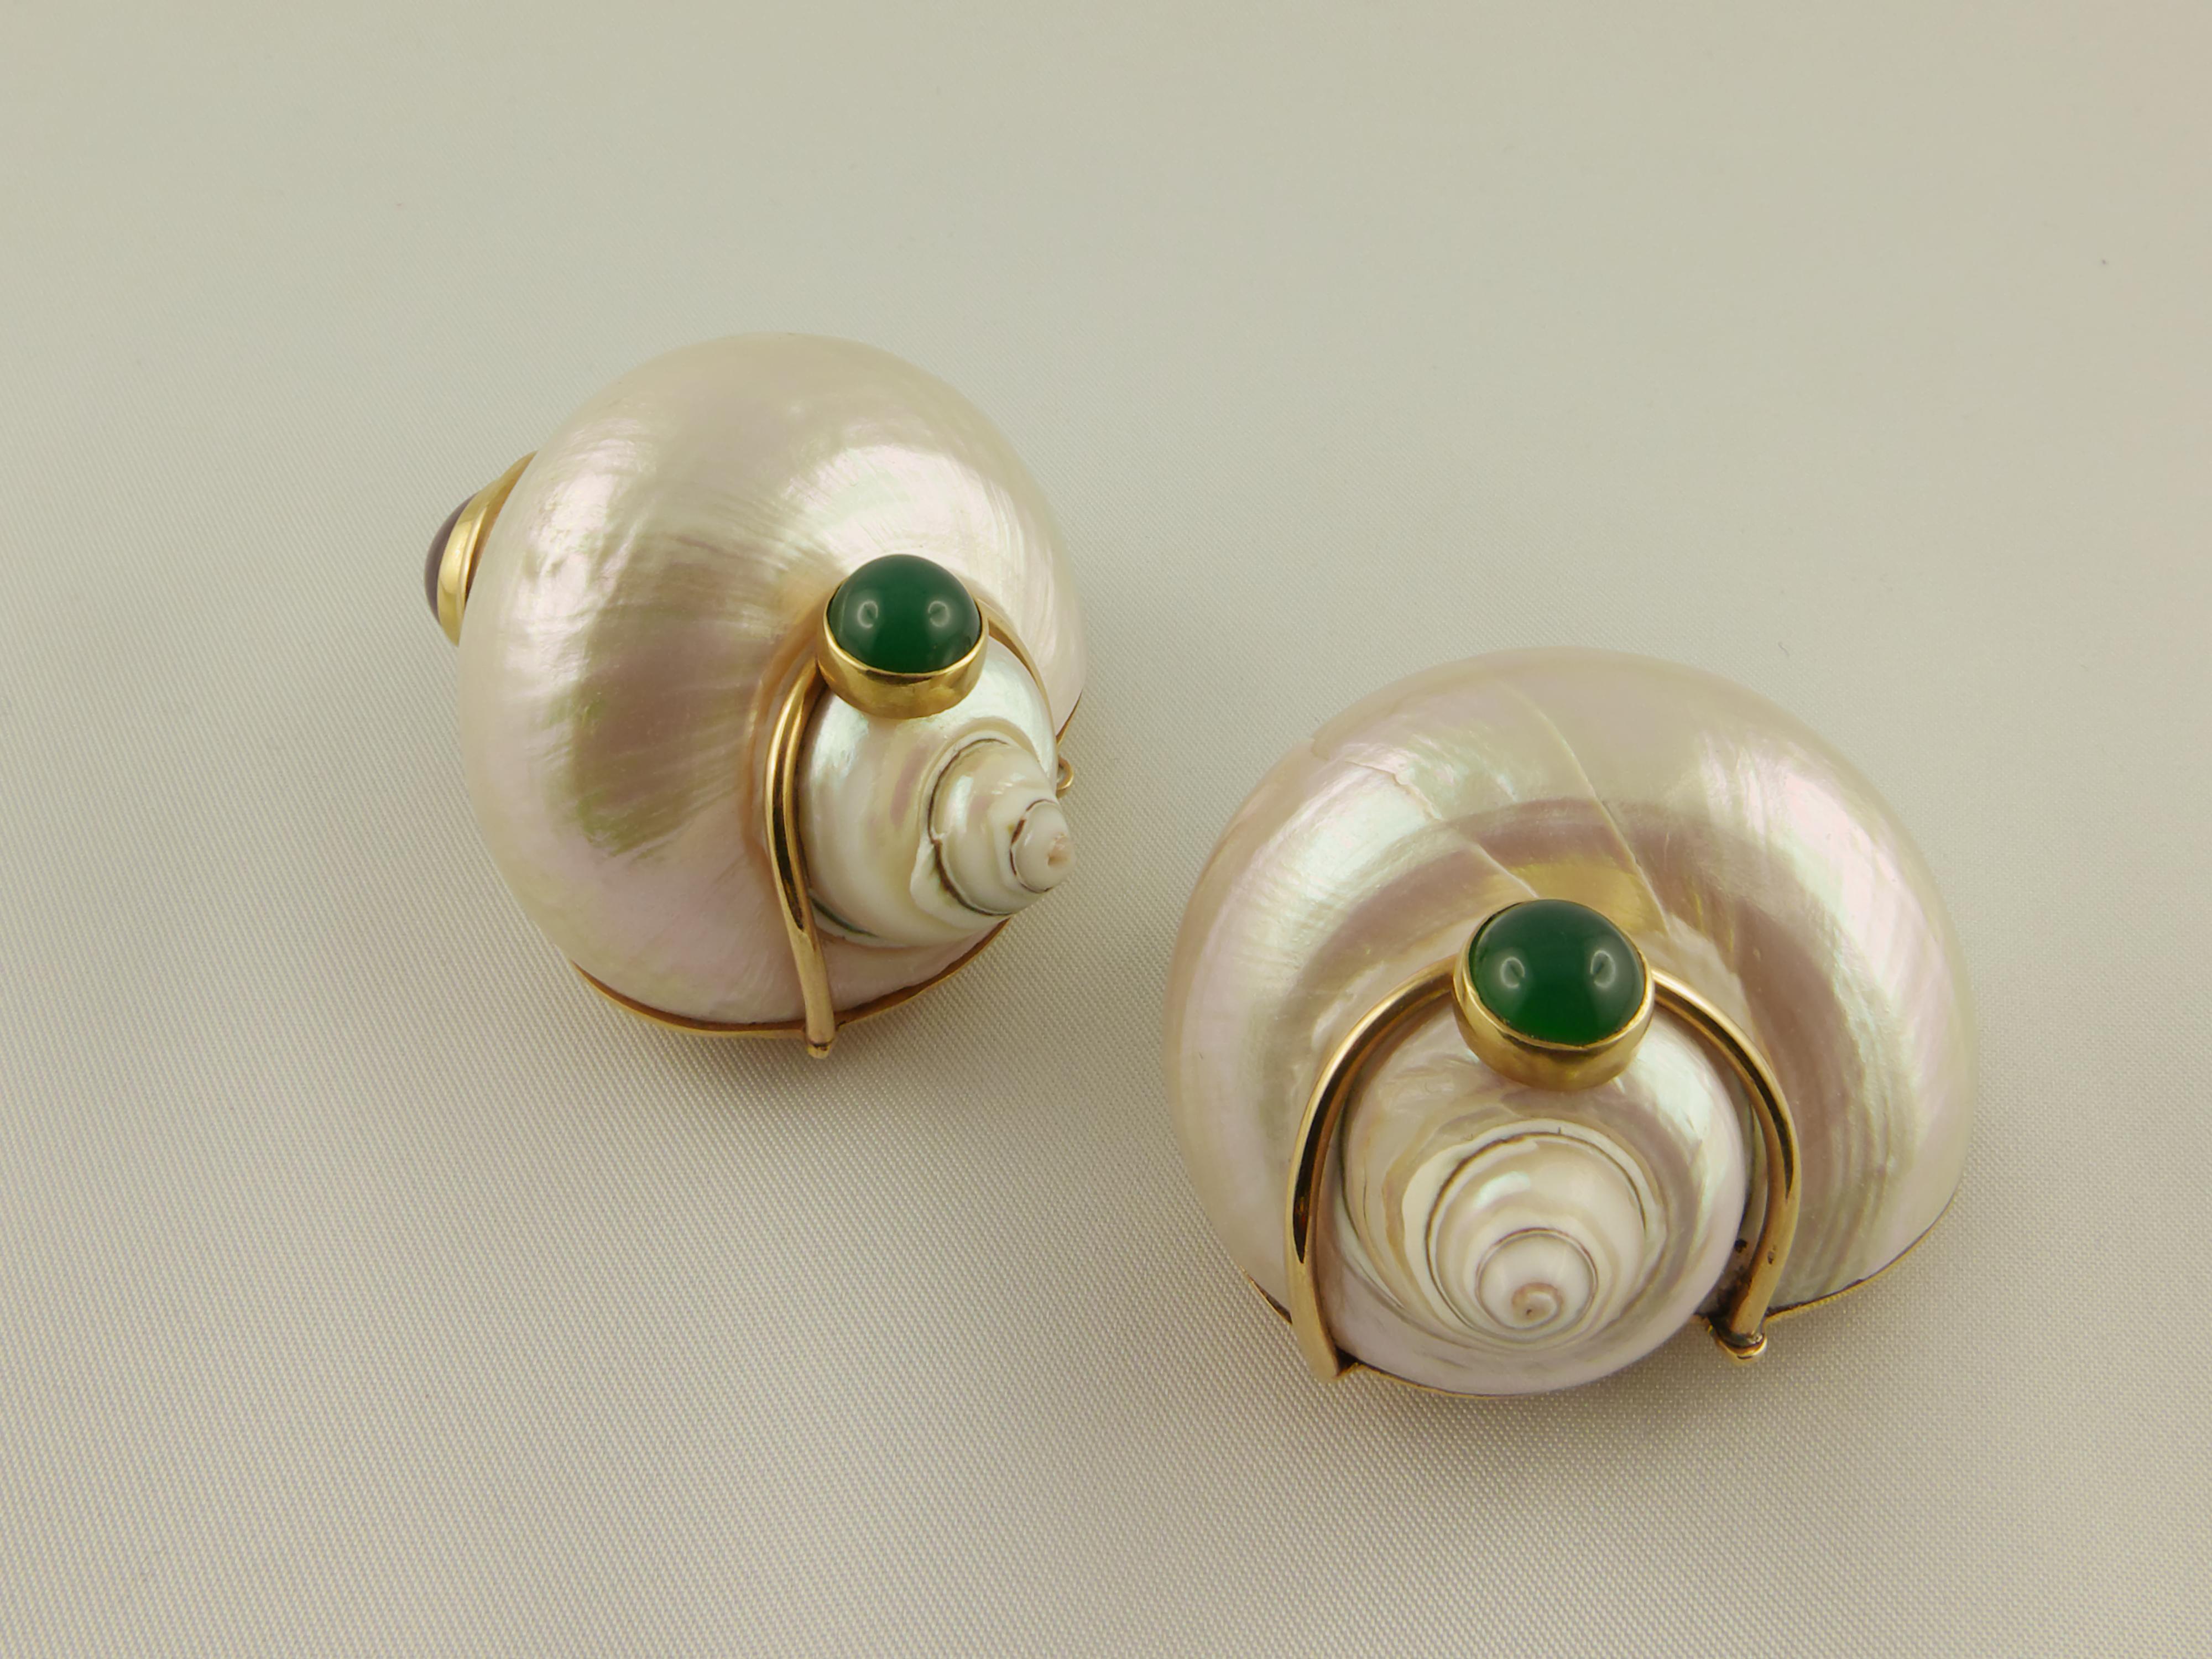 A rare and impressive pair of Shell Brooches finely crafted in 1960s by famed American jeweler Seaman Schepps. The Yellow Gold mountings display two Shells with a fine quality nacre, a very high luster and a beautiful color of gold with, in some